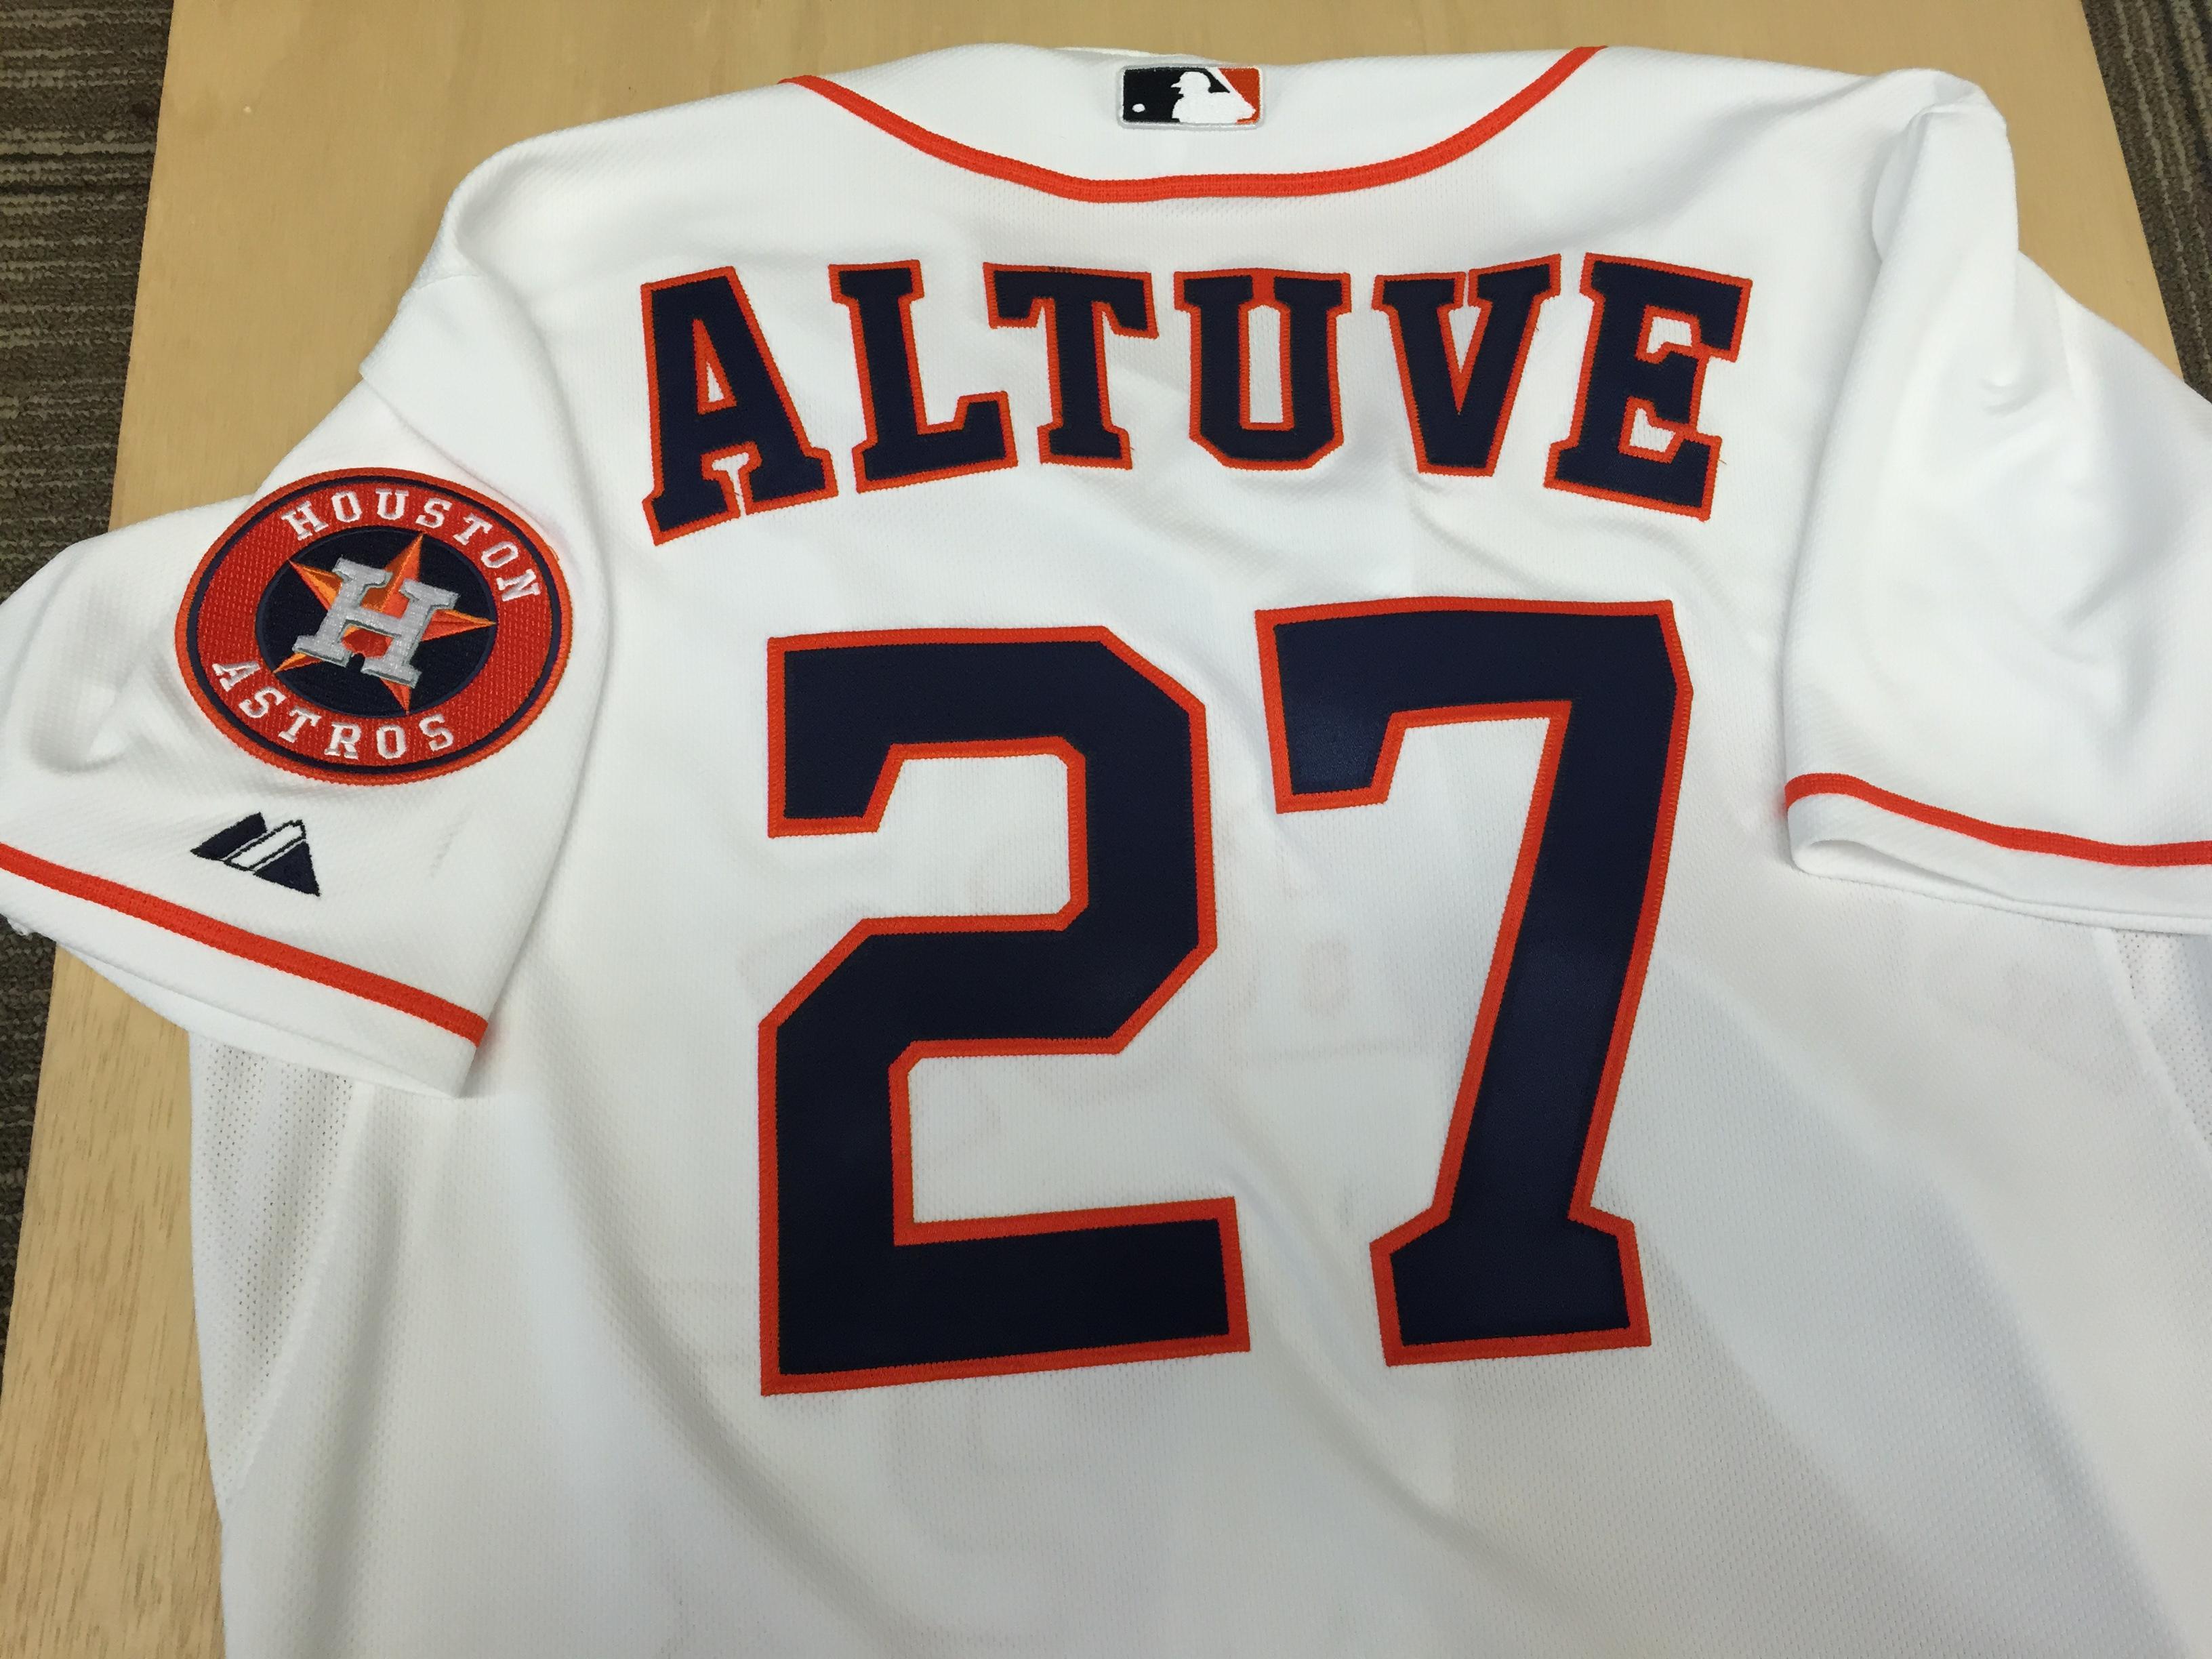 Houston Astros on X: Up next: RT for a chance to win a